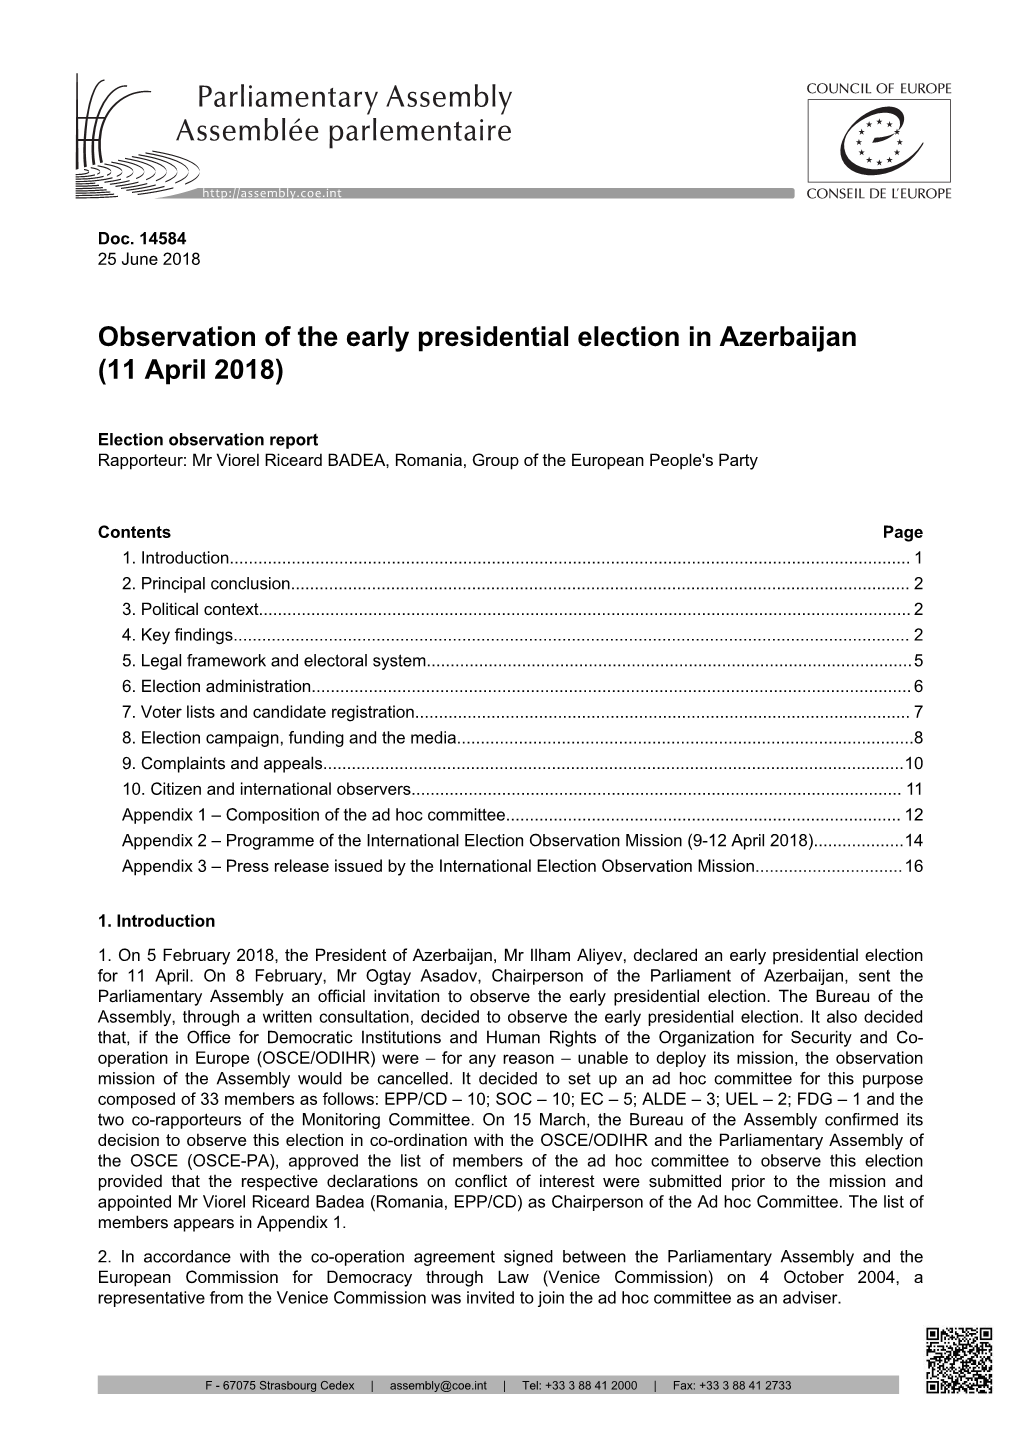 Observation of the Early Presidential Election in Azerbaijan (11 April 2018)